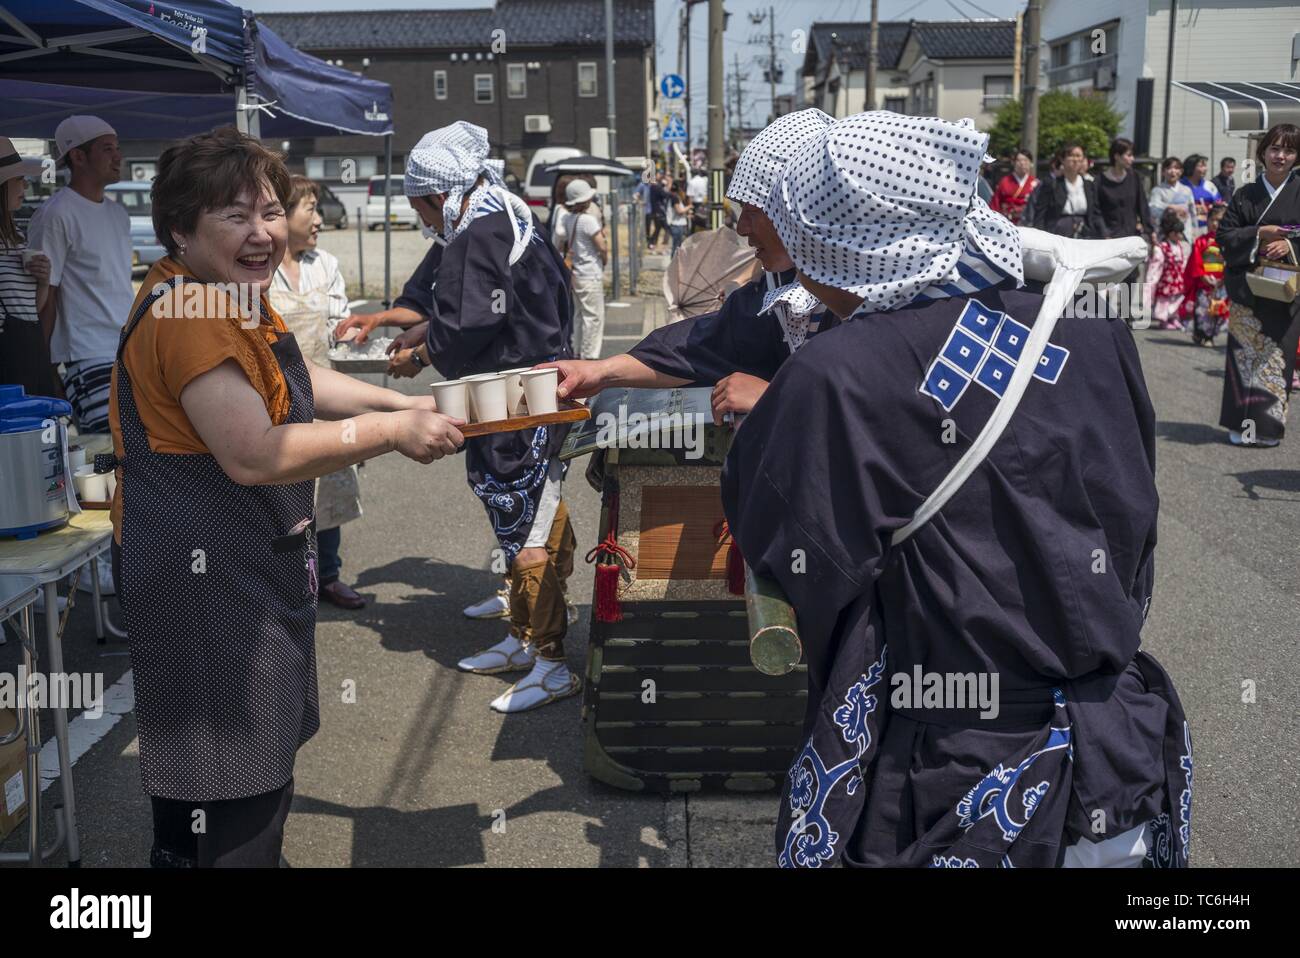 Oyama, Japan. 05th June, 2019. Oyama Inu Matsuri (Dog Festival) June 5th. The festival is based on a 300 year old legend that takes place in the 1500 year old Sugio Jinja Shrine in Oyama. Legend has it that the shrine was tormented by demons who demanded the sacrifice of a young girl every year. The villagers complied to avoid famine and torment. A simple dog named Mekke Inu finally killed all the demons, but in the process became mortally wounded and died. The festival commemorates the heroic dog with a parade around the town ending at the shrine. Credit: ZUMA Press, Inc./Alamy Live News Stock Photo